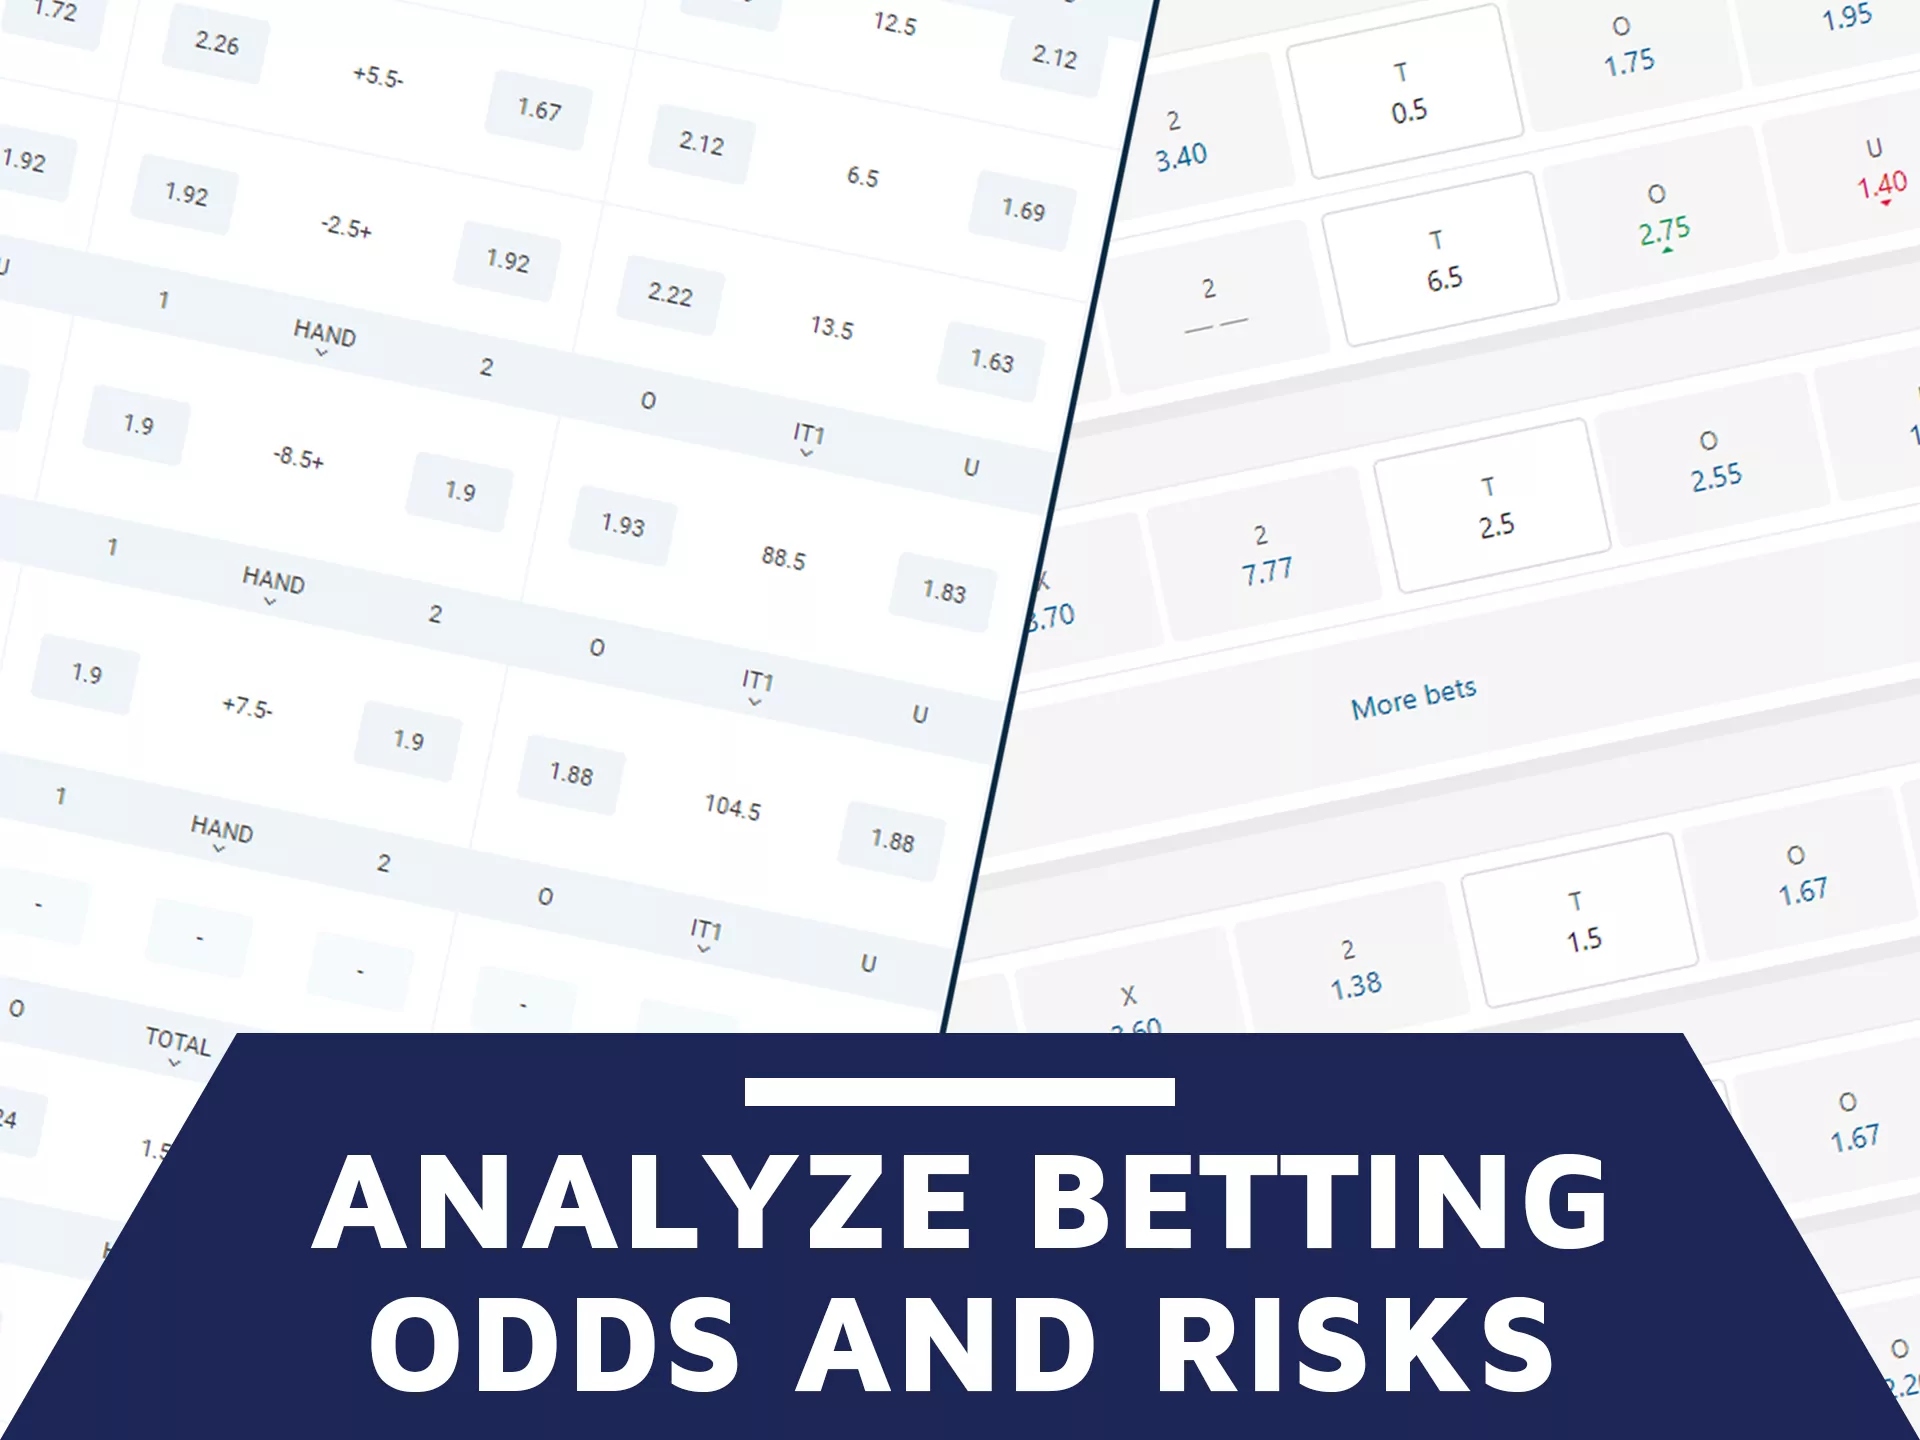 Analyze betting odds for best bet.